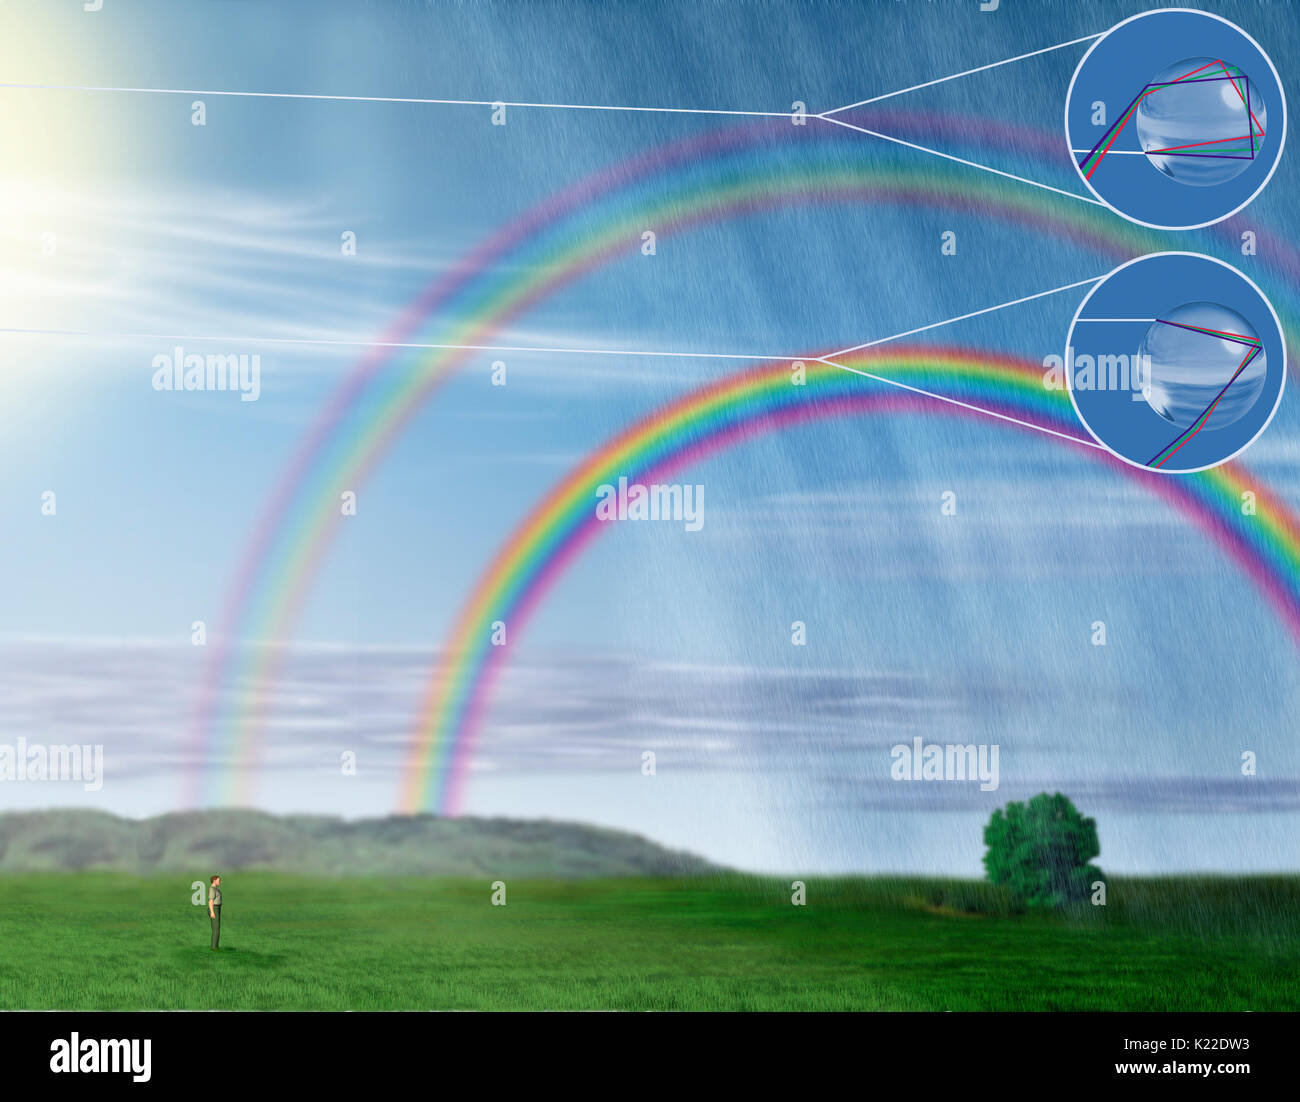 Sometimes, two reflections occur within a single raindrop. A secondary rainbow, less sharply defined and with the colors in reverse order, then appears over the first one. Stock Photo